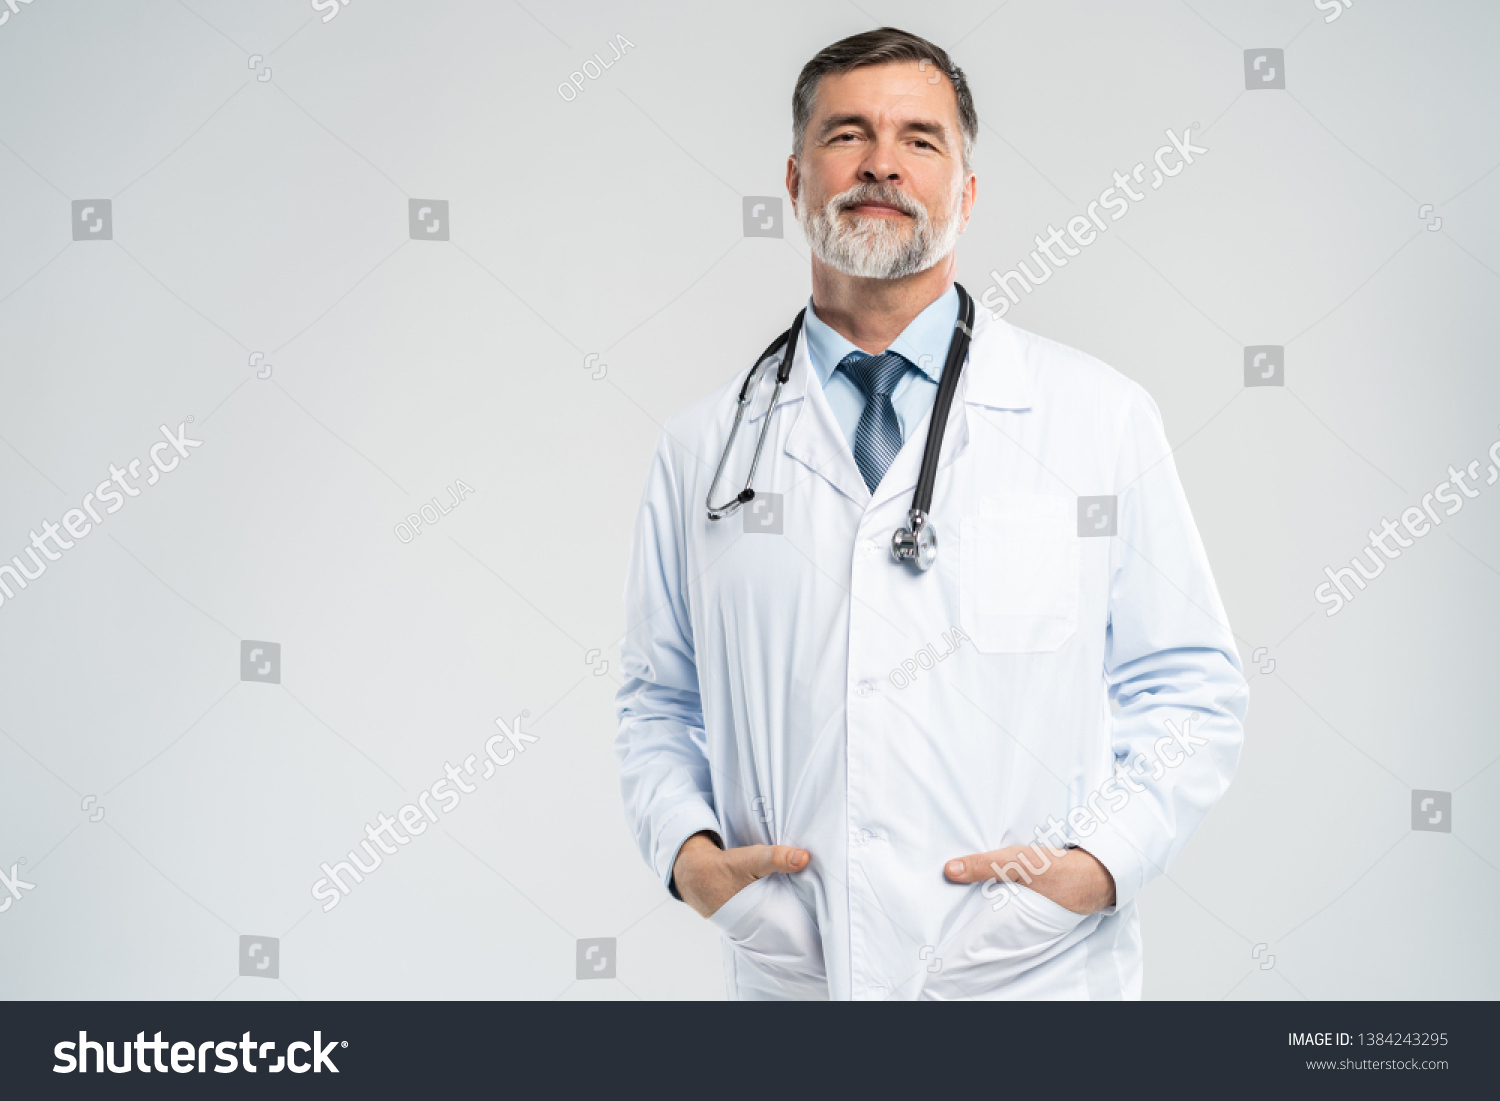 Cheerful mature doctor posing and smiling at camera, healthcare and medicine #1384243295